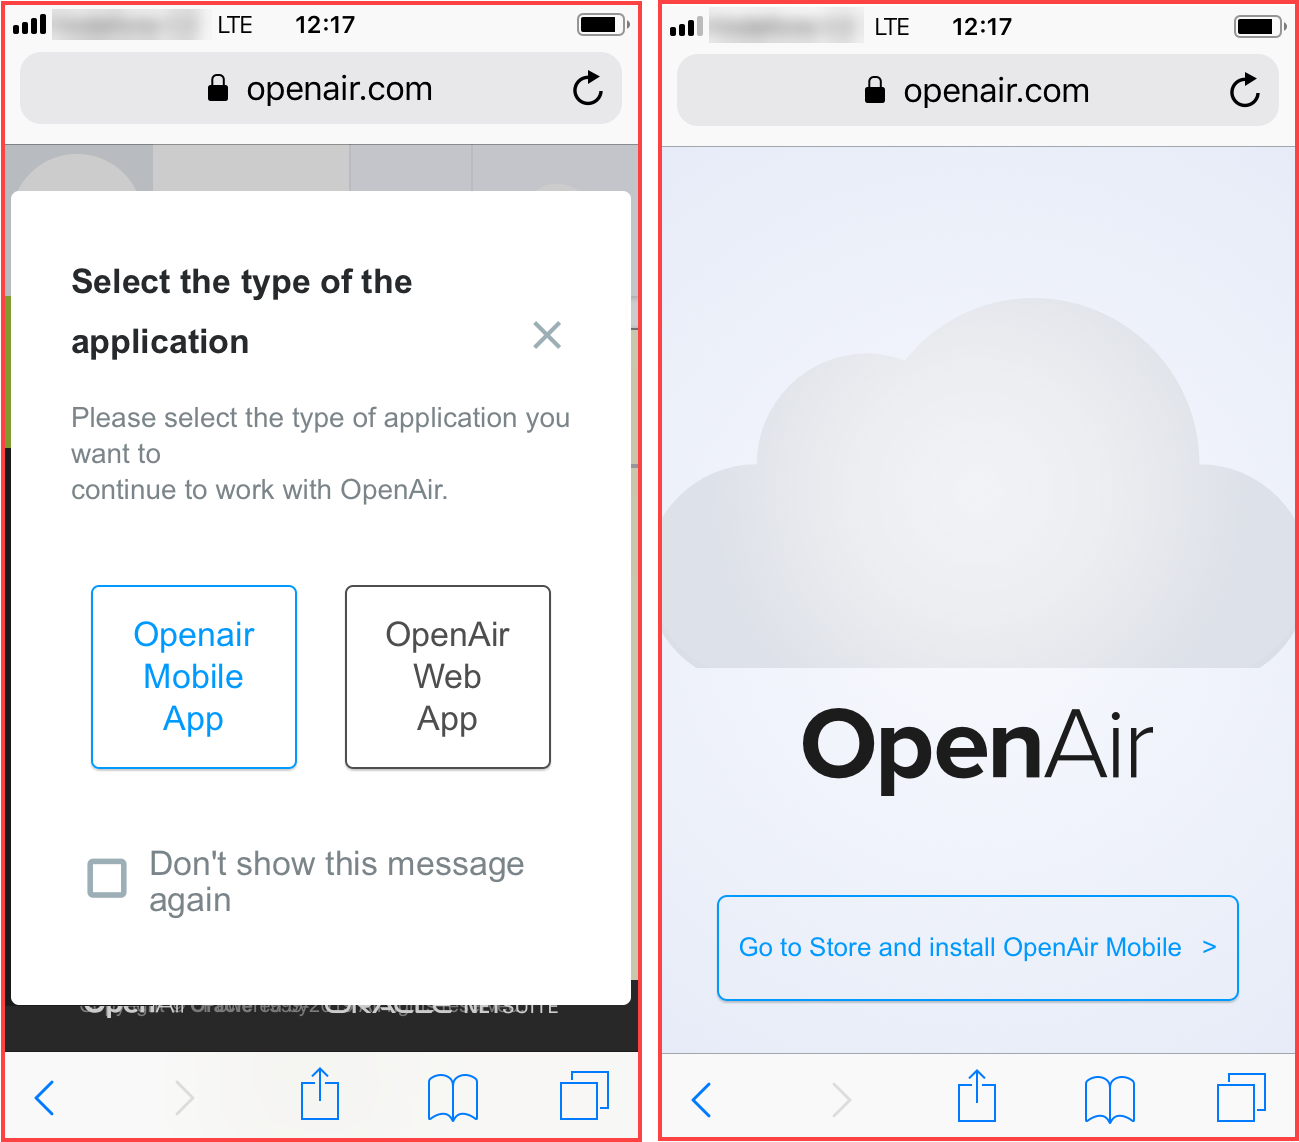 Prompts inviting users to switch to and to download OpenAir Mobile